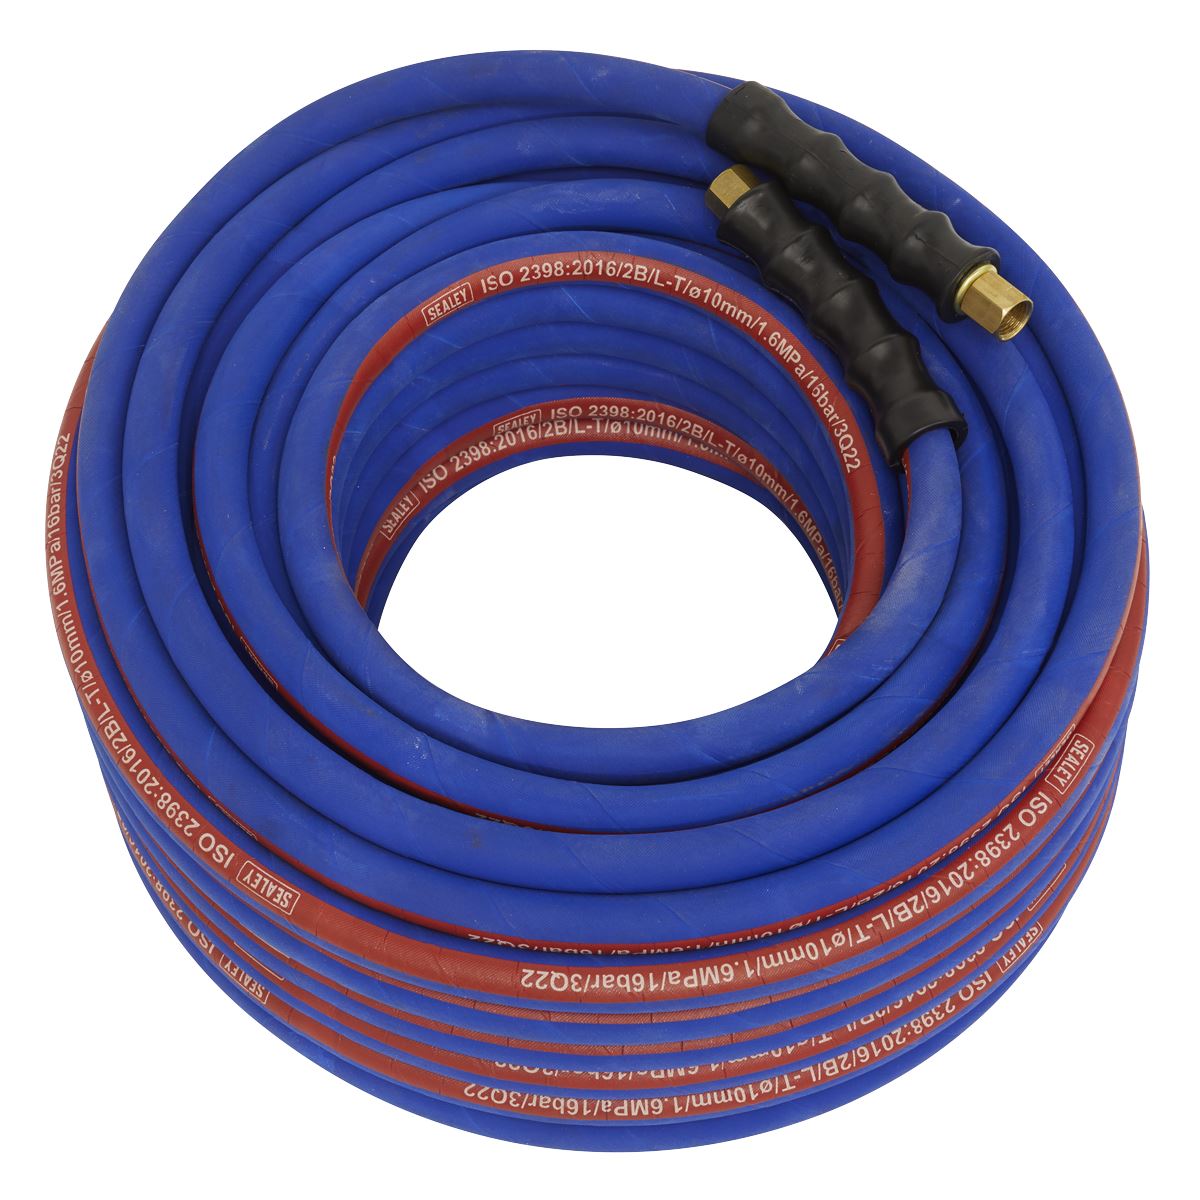 Sealey Air Hose 30m x Ø10mm with 1/4"BSP Unions Extra-Heavy-Duty